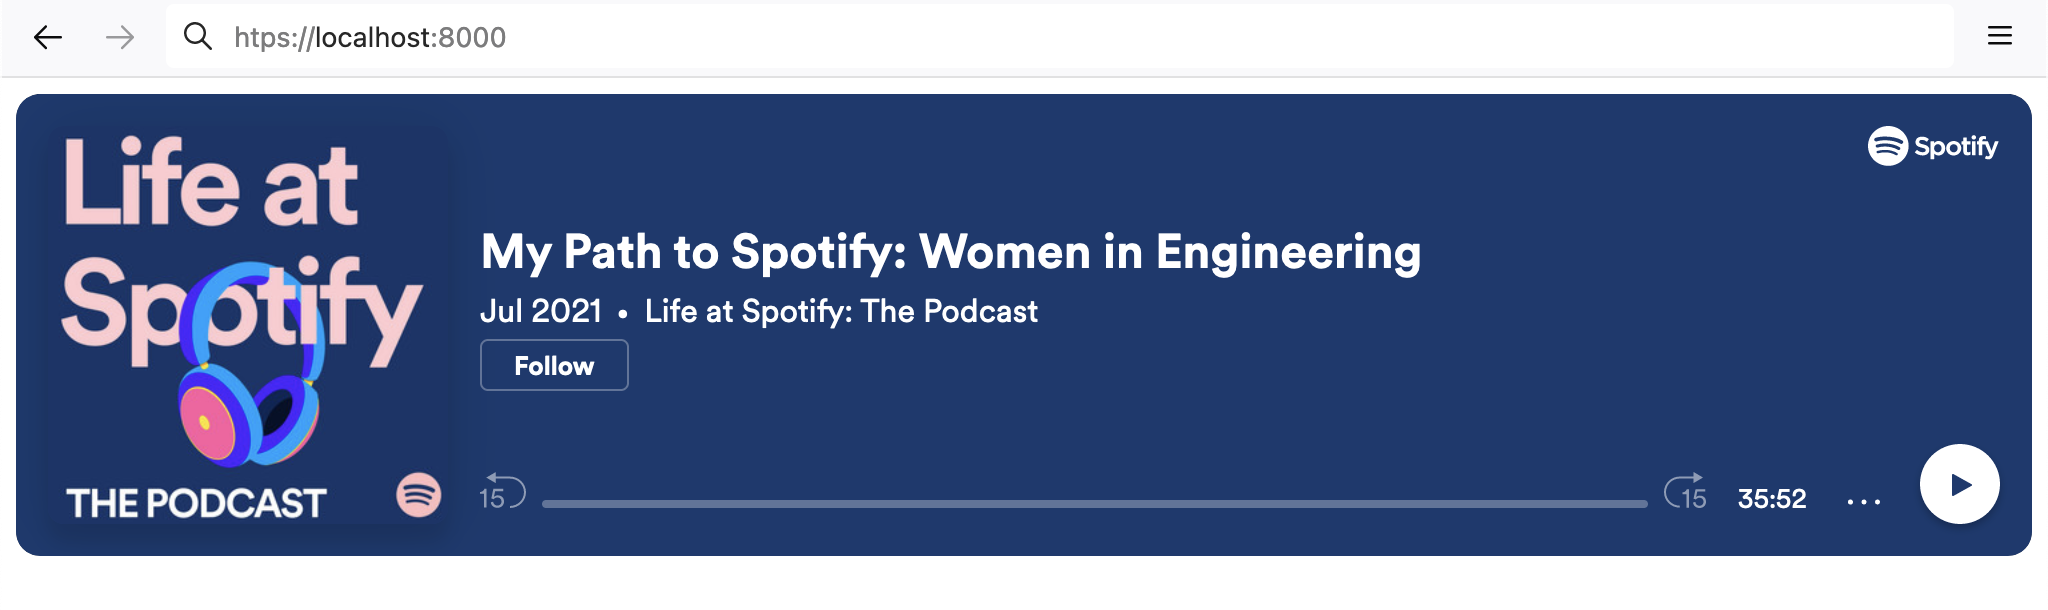 Web page with an Embed for the Life at Spotify podcast